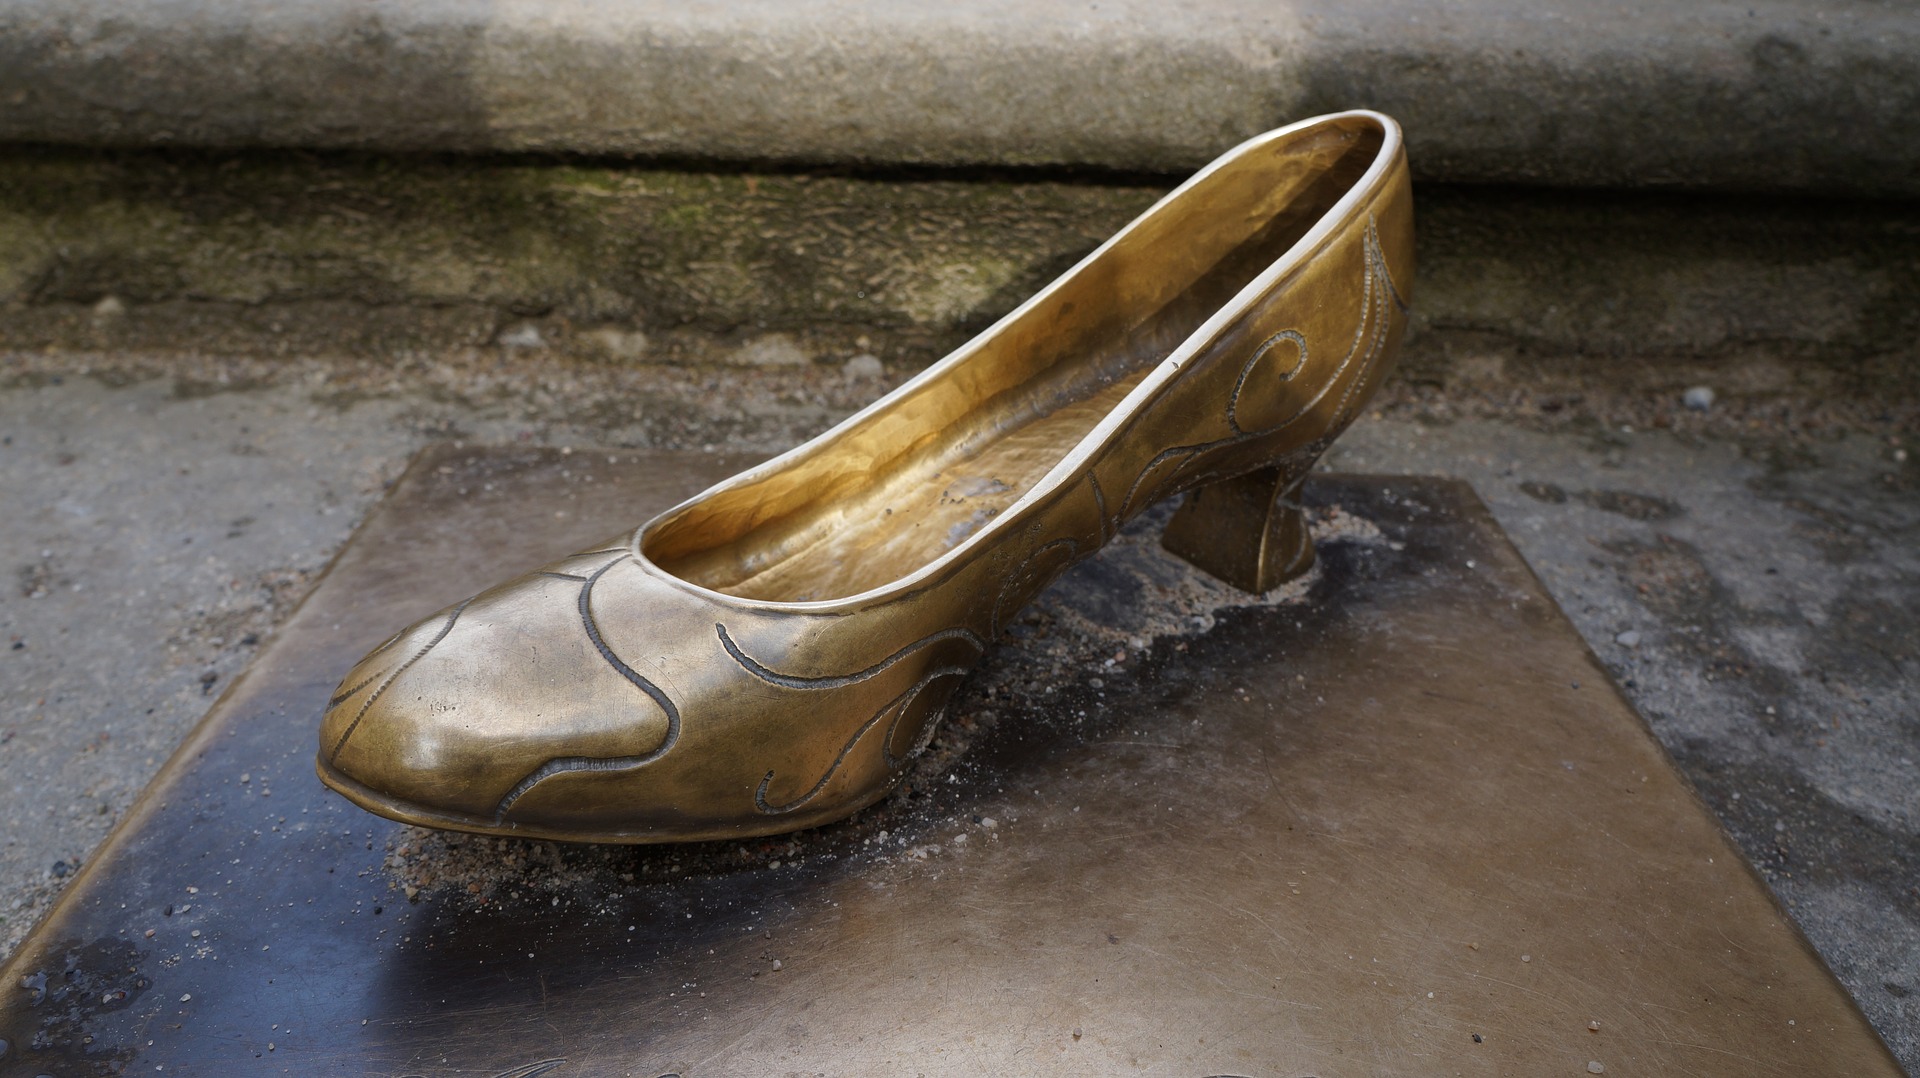 Notes & Queries: Why did Cinderella's slipper come off?, Fairytales